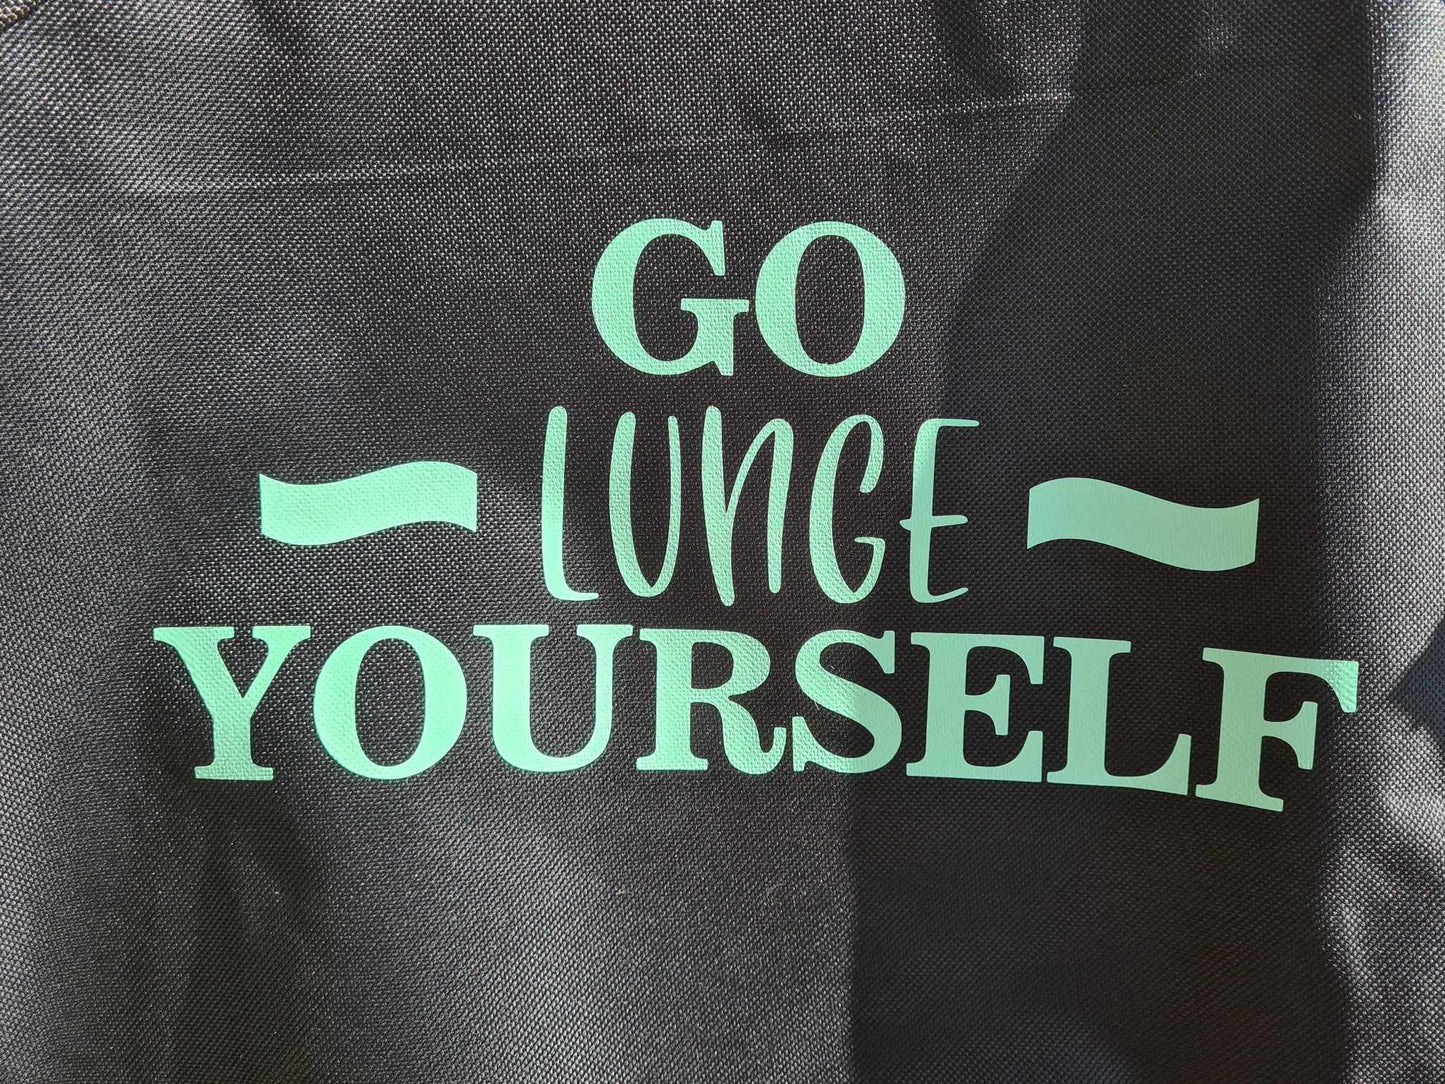 'Go Lunge Yourself'